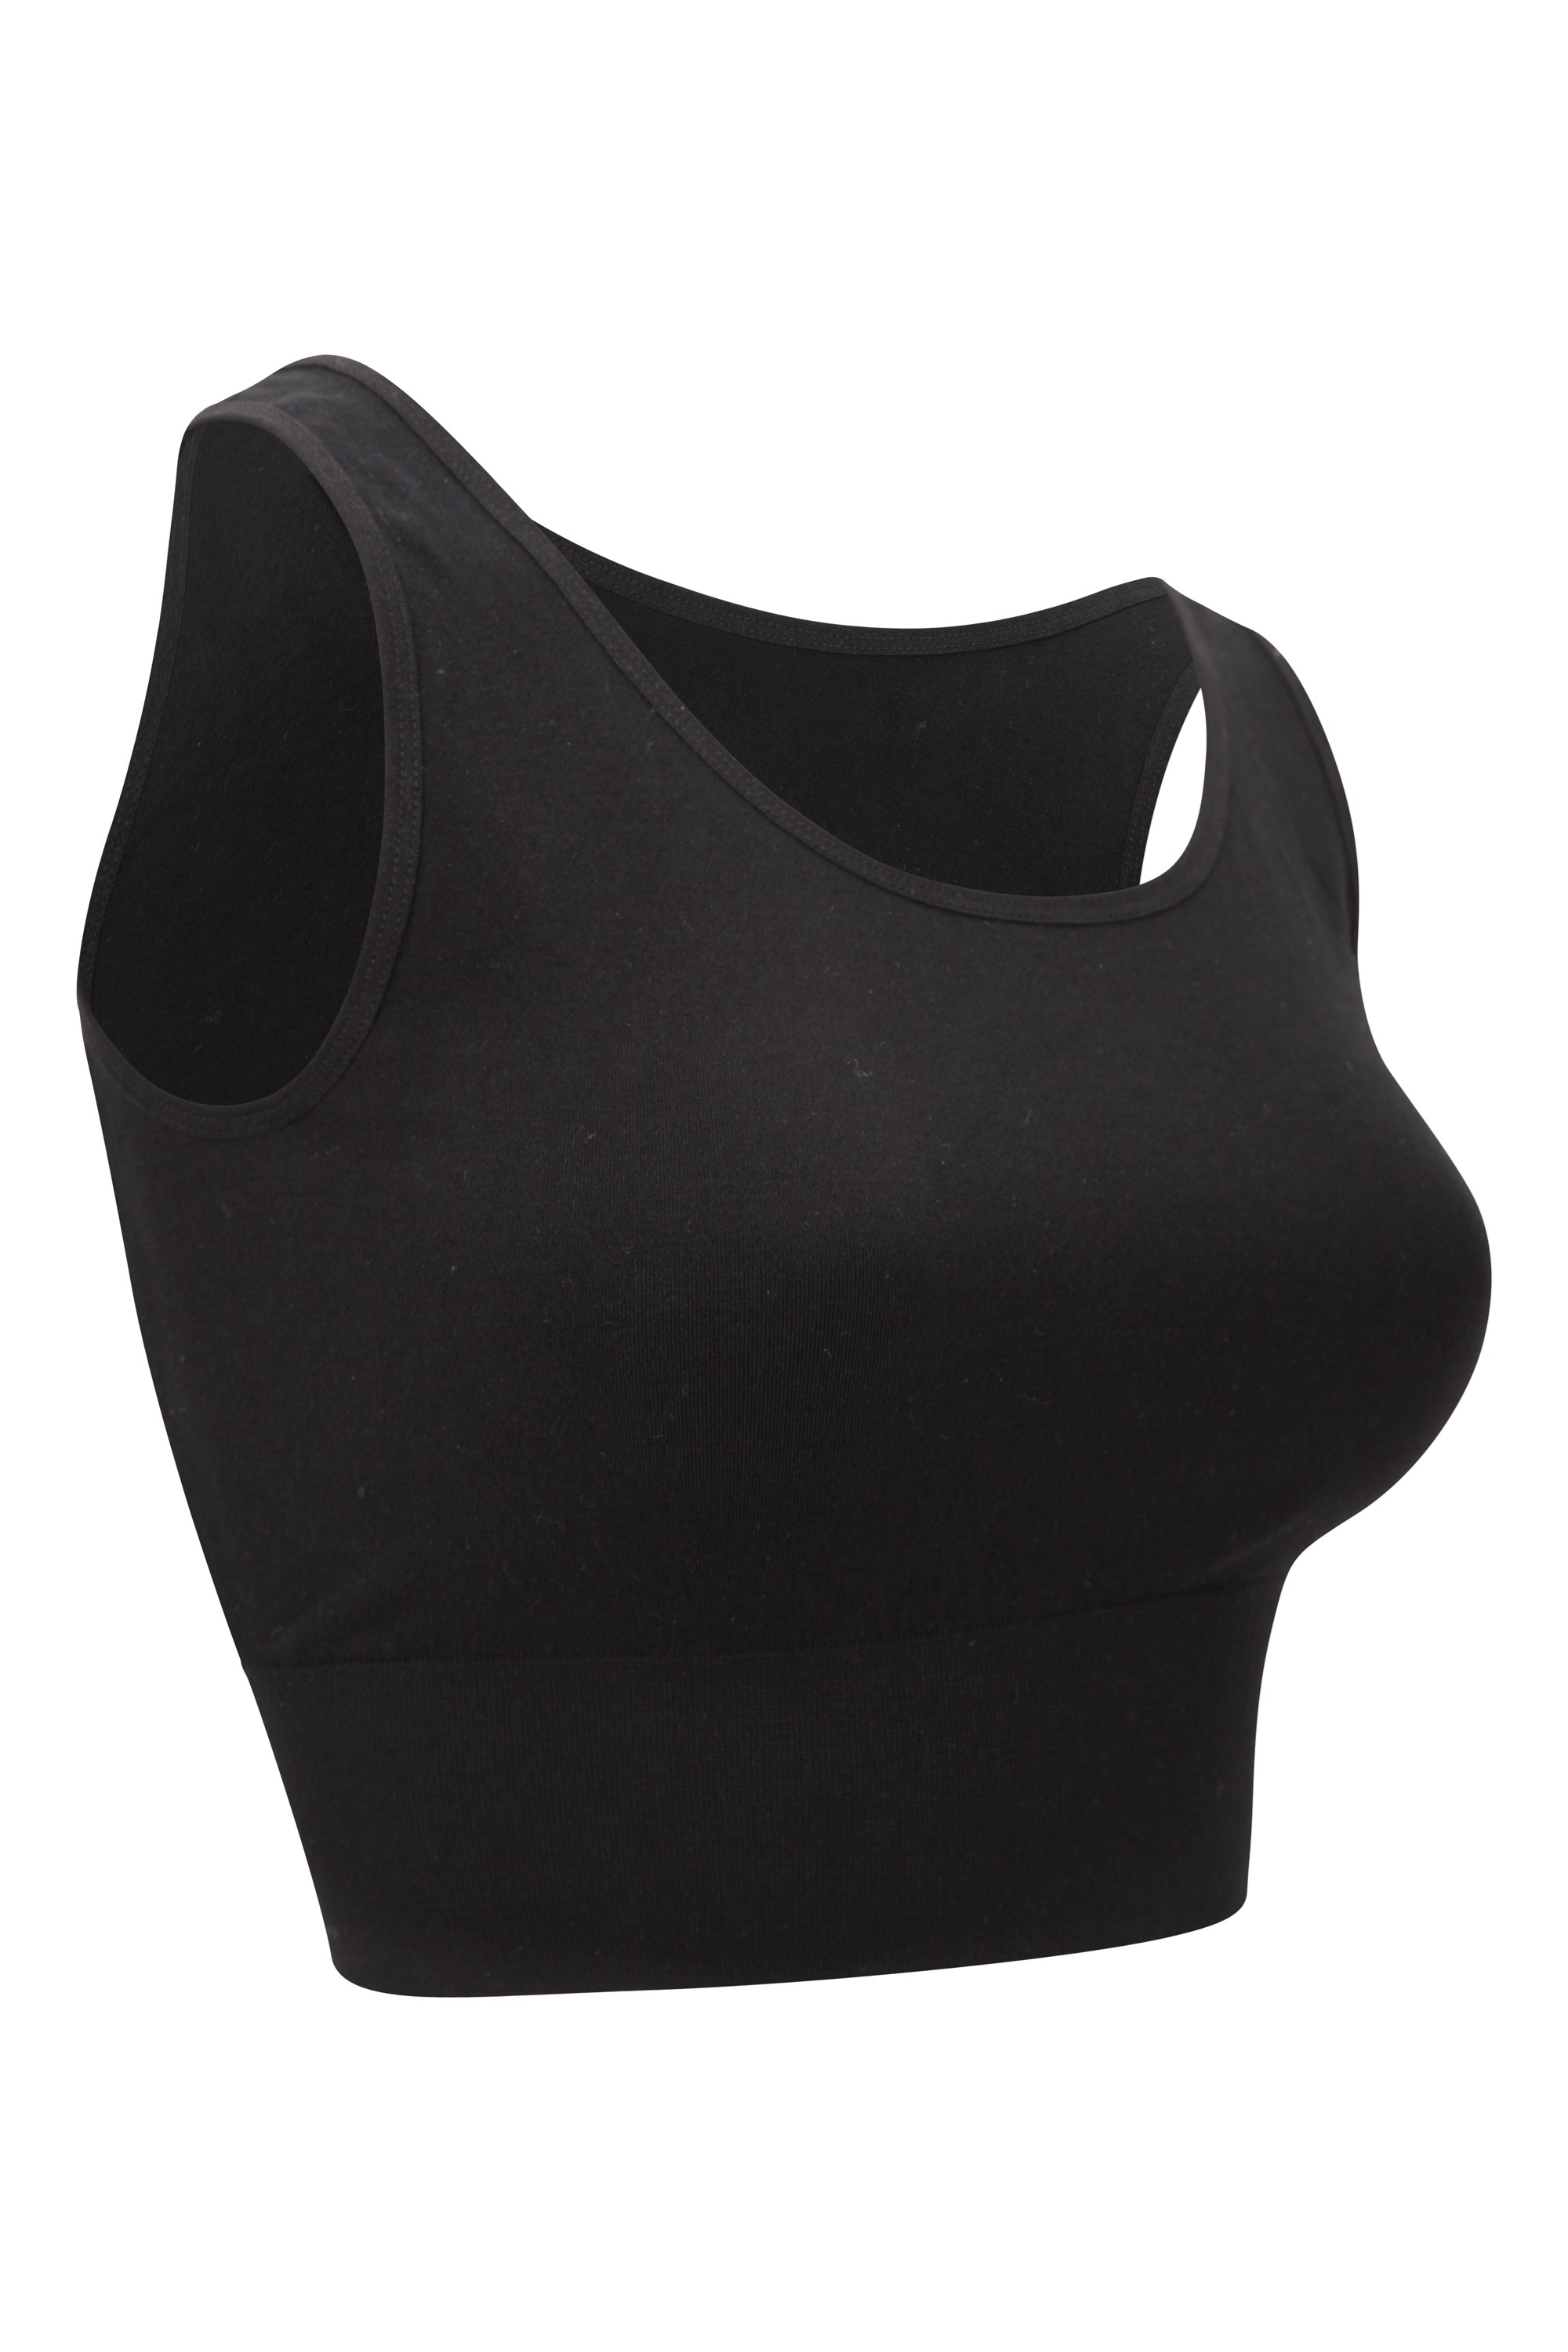 Time Trial Womens Mid-Support Sports Bra